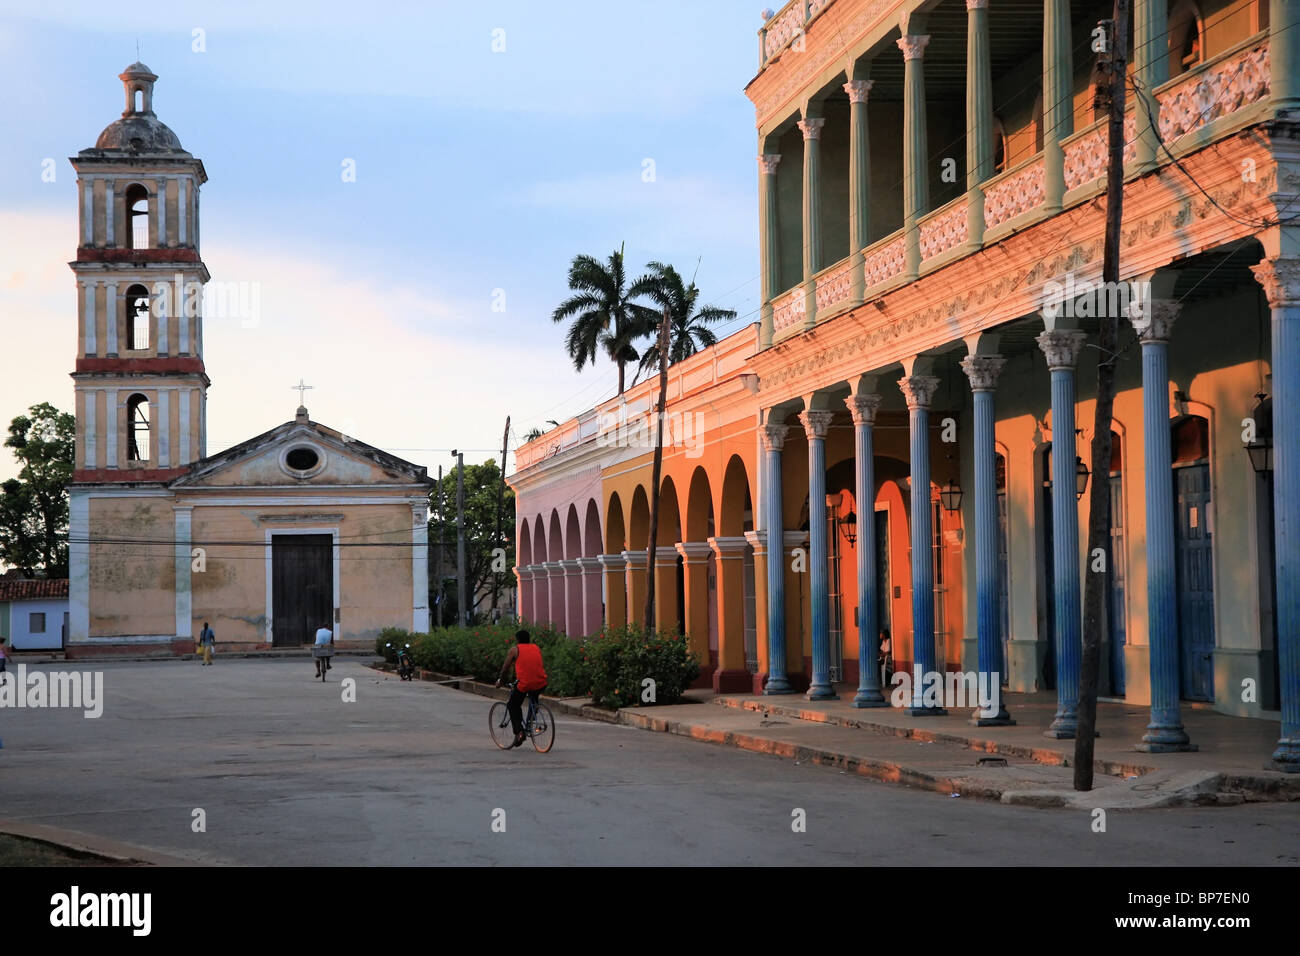 A street at sunset in Remedios, Cuba Stock Photo